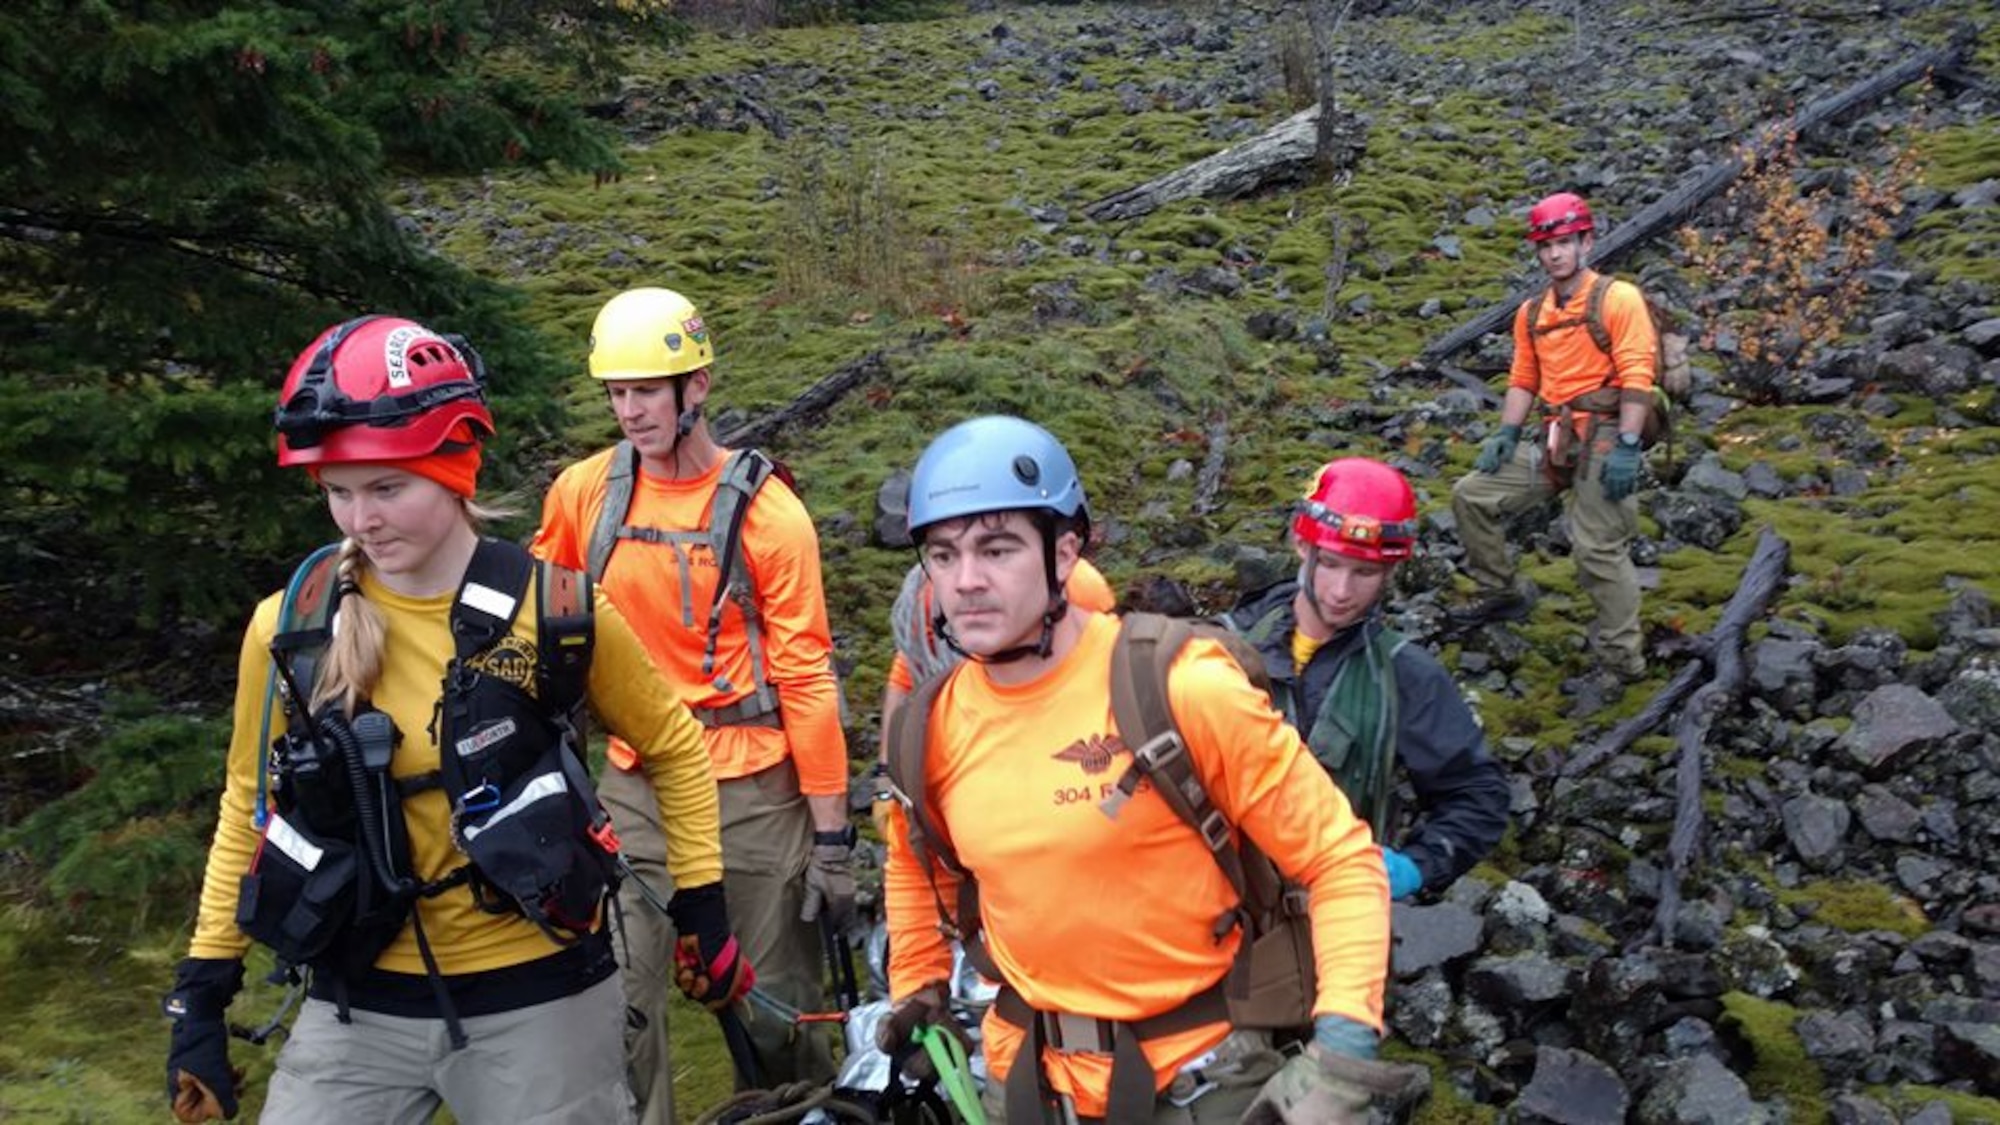 Air Force Reserve Pararescuemen or PJs from Portland’s 304th Rescue Squadron assisted in recovering a hiker who was declared missing October 25, 2016. Early October 26, 2016, a team of four PJs scoured steep rocky terrain near the Oregon-Washington border until nightfall with the assistance of volunteers, civil search and rescue teams, AT&T and Apple. Information was obtained to pinpoint the GPS coordinates for the victim, 31-year-old Melvin Burtch's, cell phone allowing searchers to navigate to the cell phone location. They found Burtch’s body within 50 yards of the location of the phone. (U.S. Air Force photo/ Maj. Chris Bernard)
